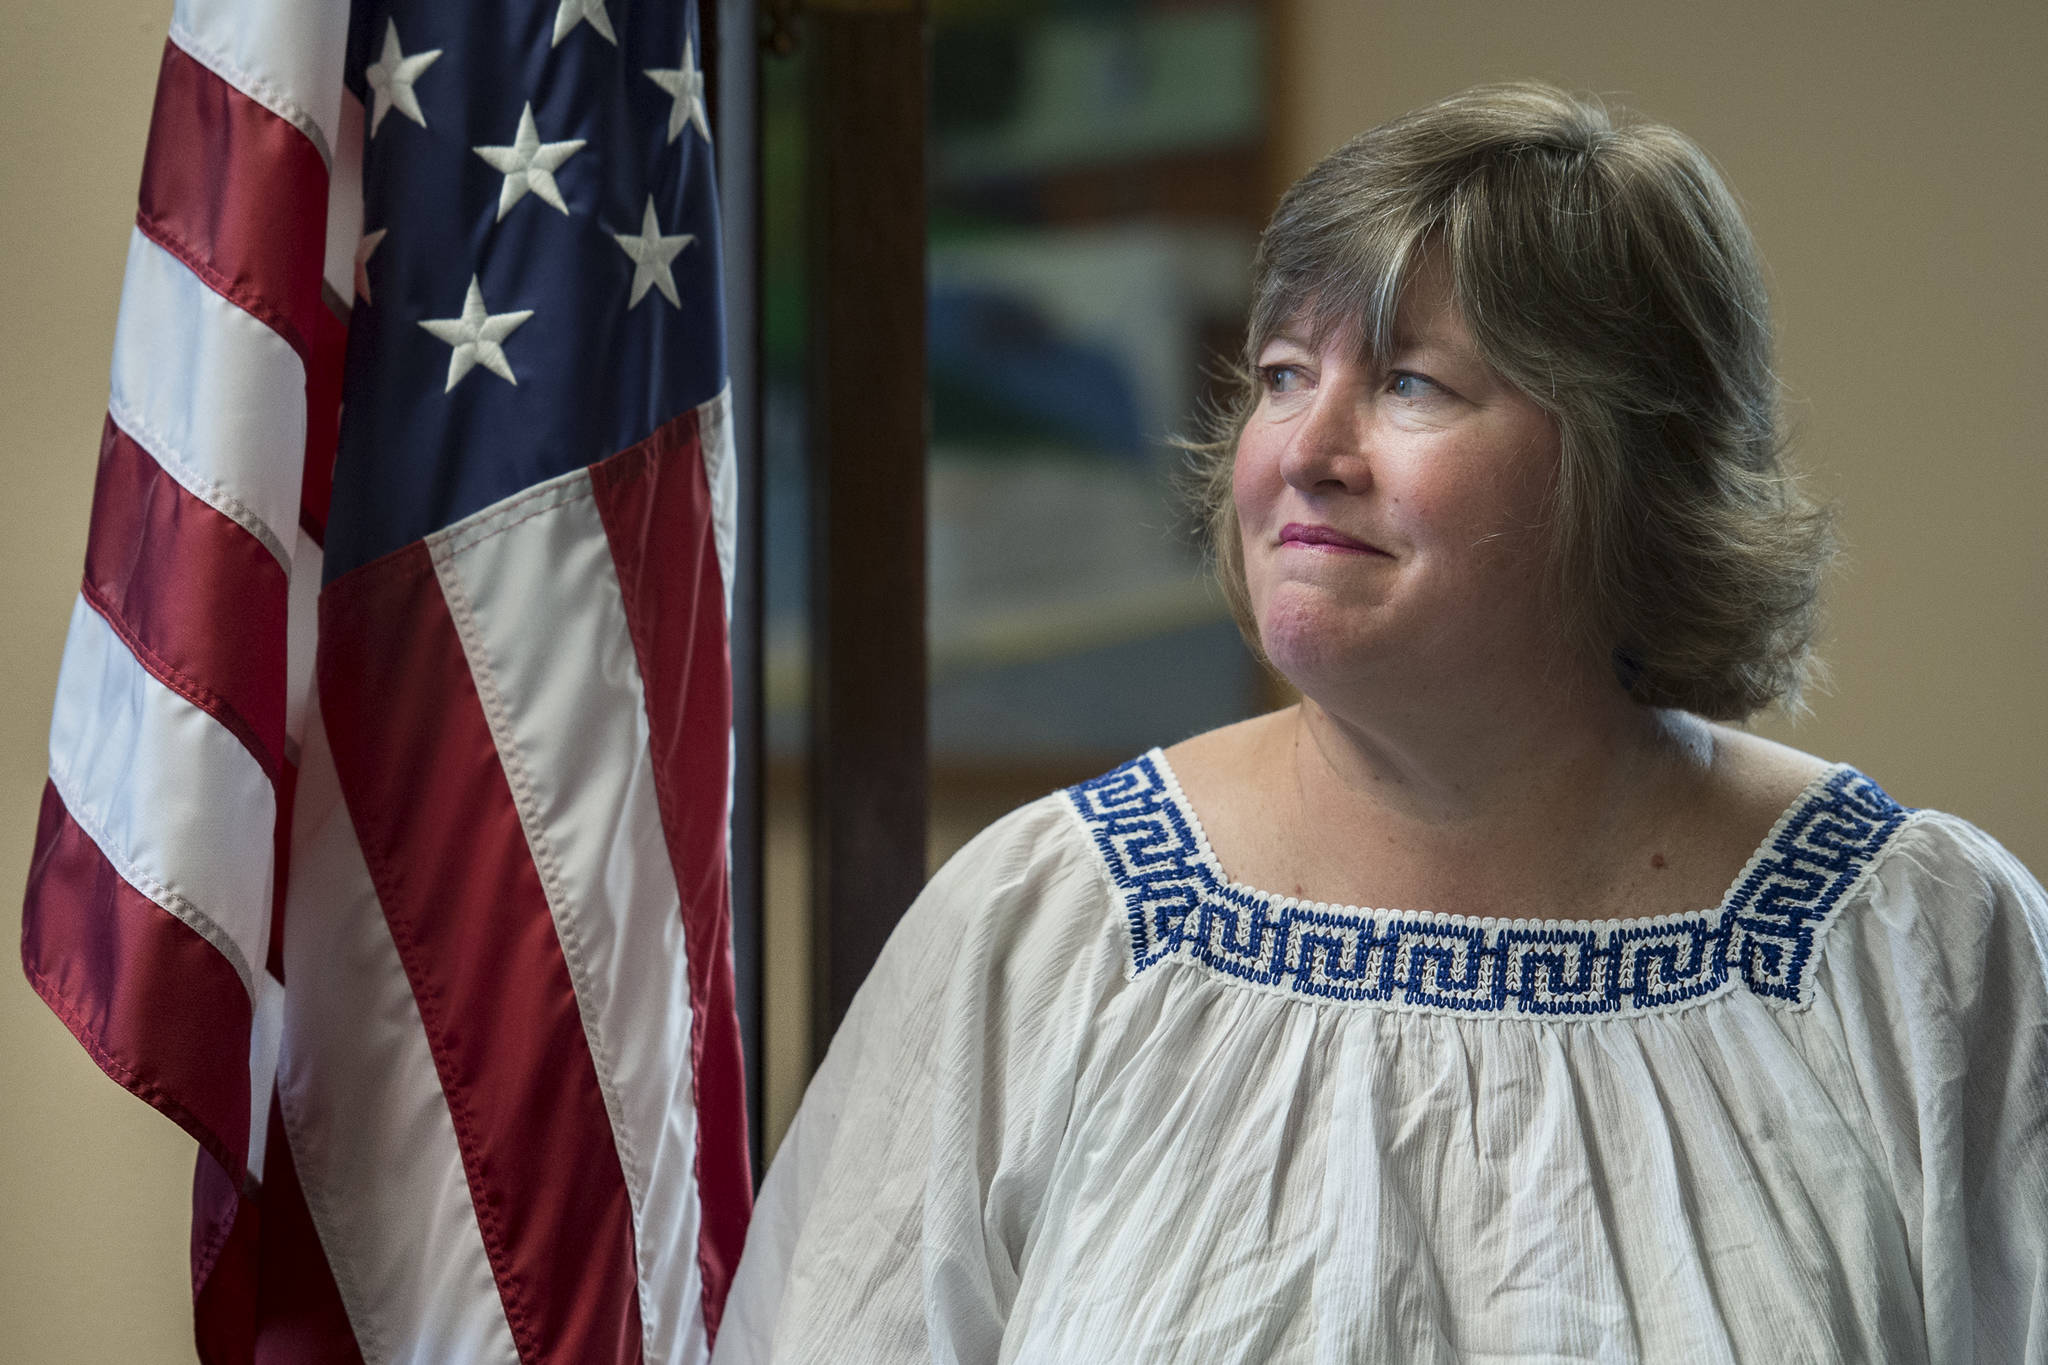 Rep. Sara Hannan, D-Juneau, talks about state government jobs leaving Juneau during an interview at her Capitol office on Friday, June 14, 2019. (Michael Penn | Juneau Empire)